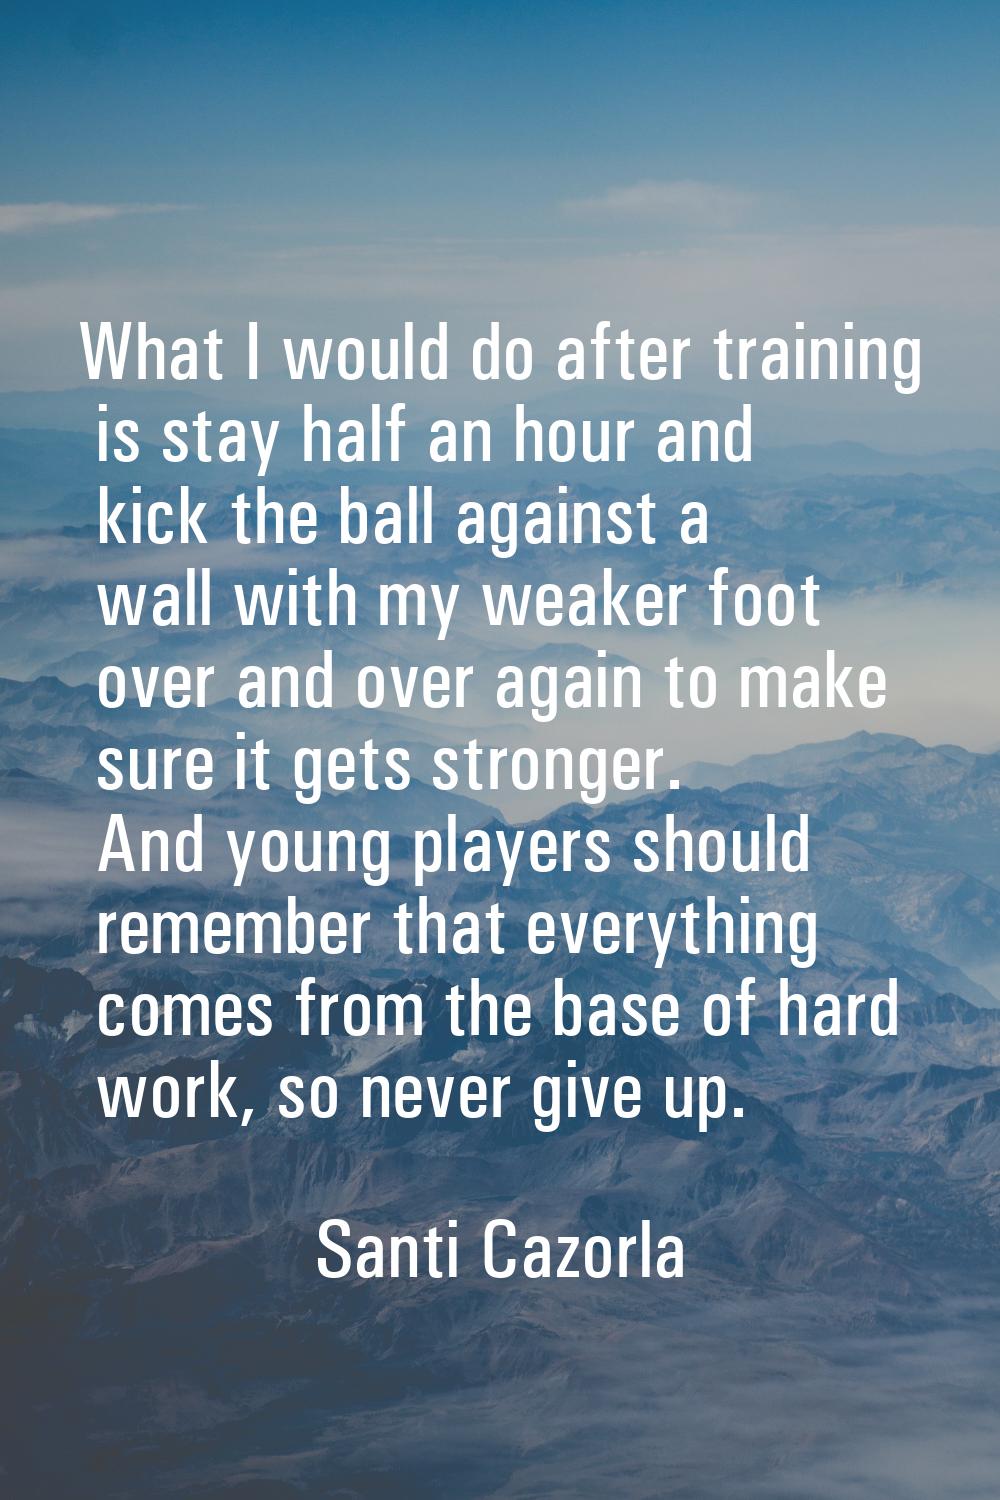 What I would do after training is stay half an hour and kick the ball against a wall with my weaker